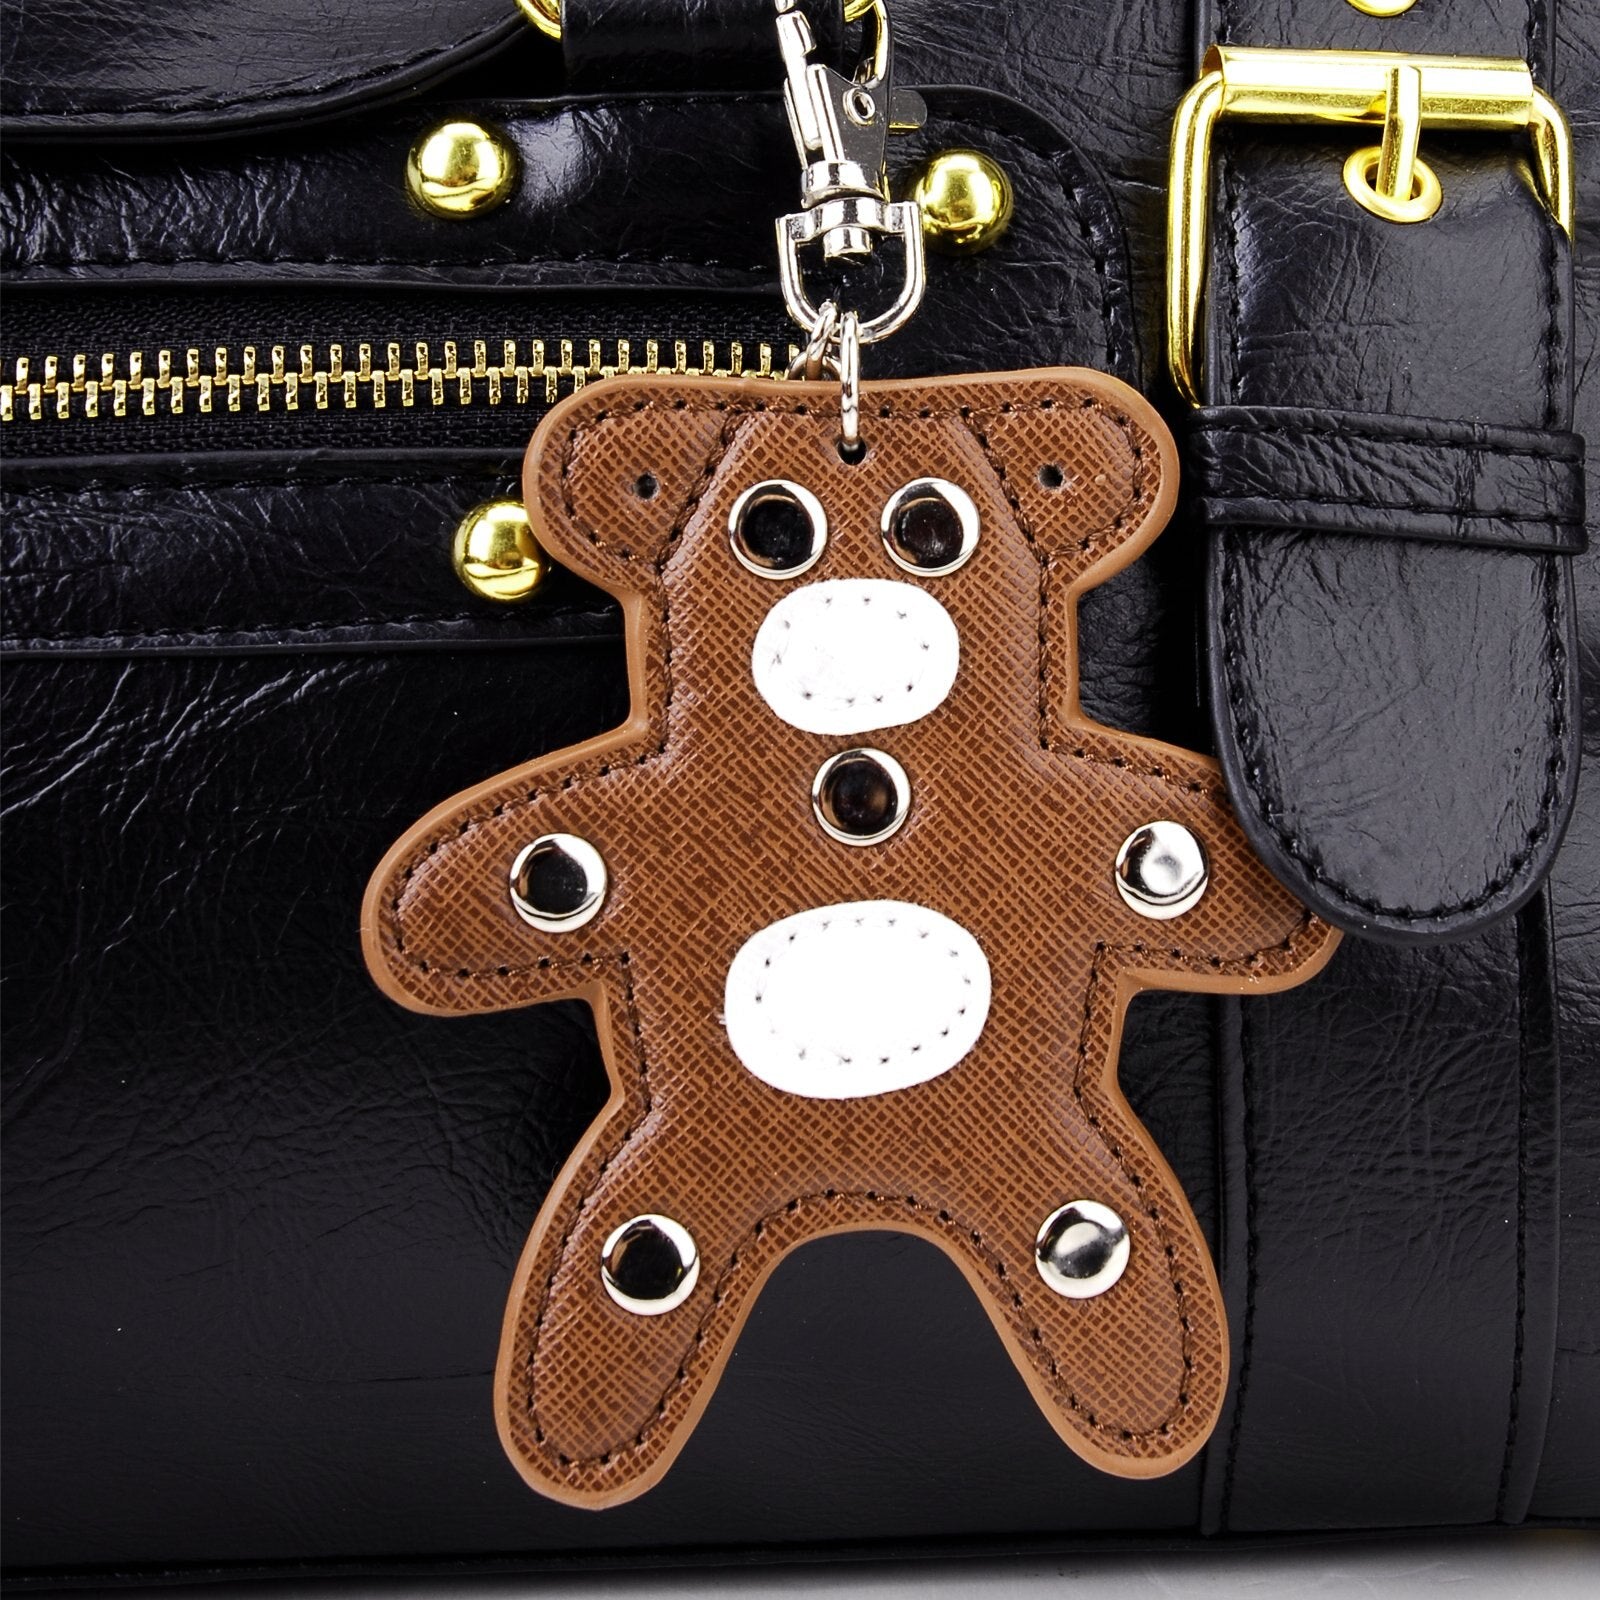 Black hand hold PU leather rock scratch with a small bear Handbag for women - ebowsos